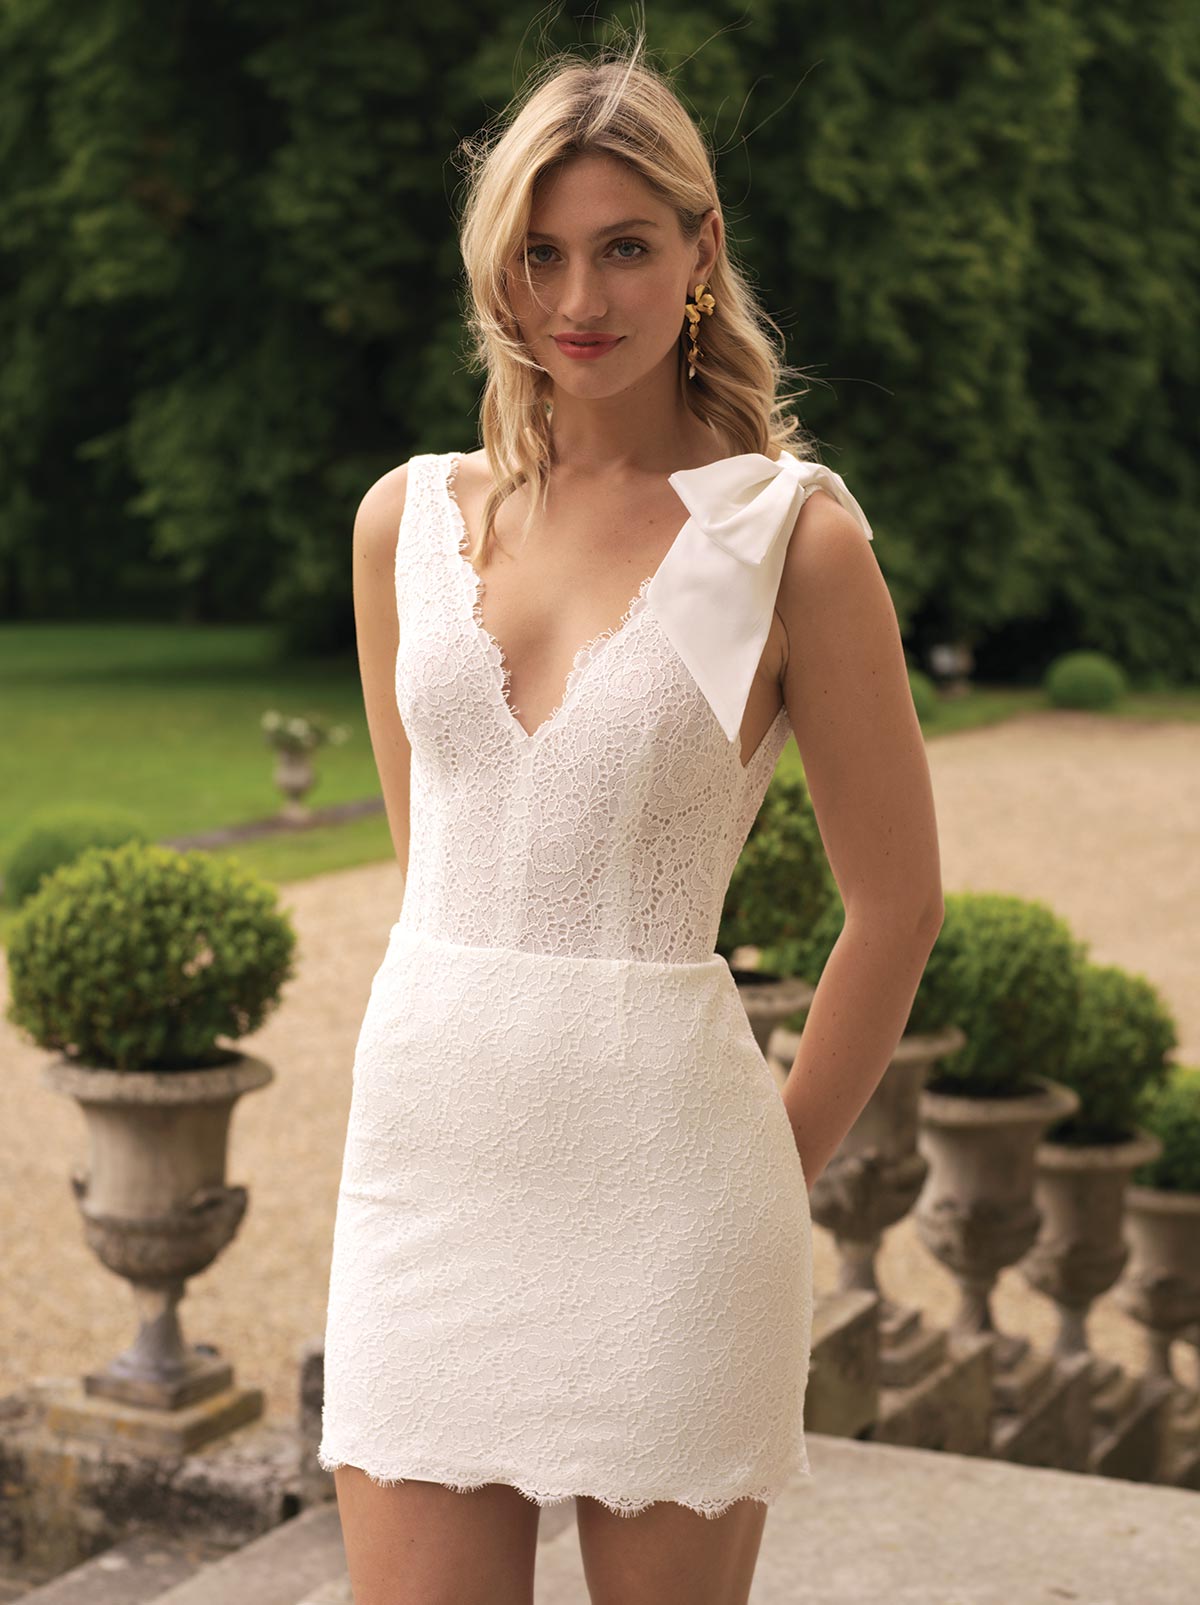 opaline-robe-face-marie-laporte-collection-2020